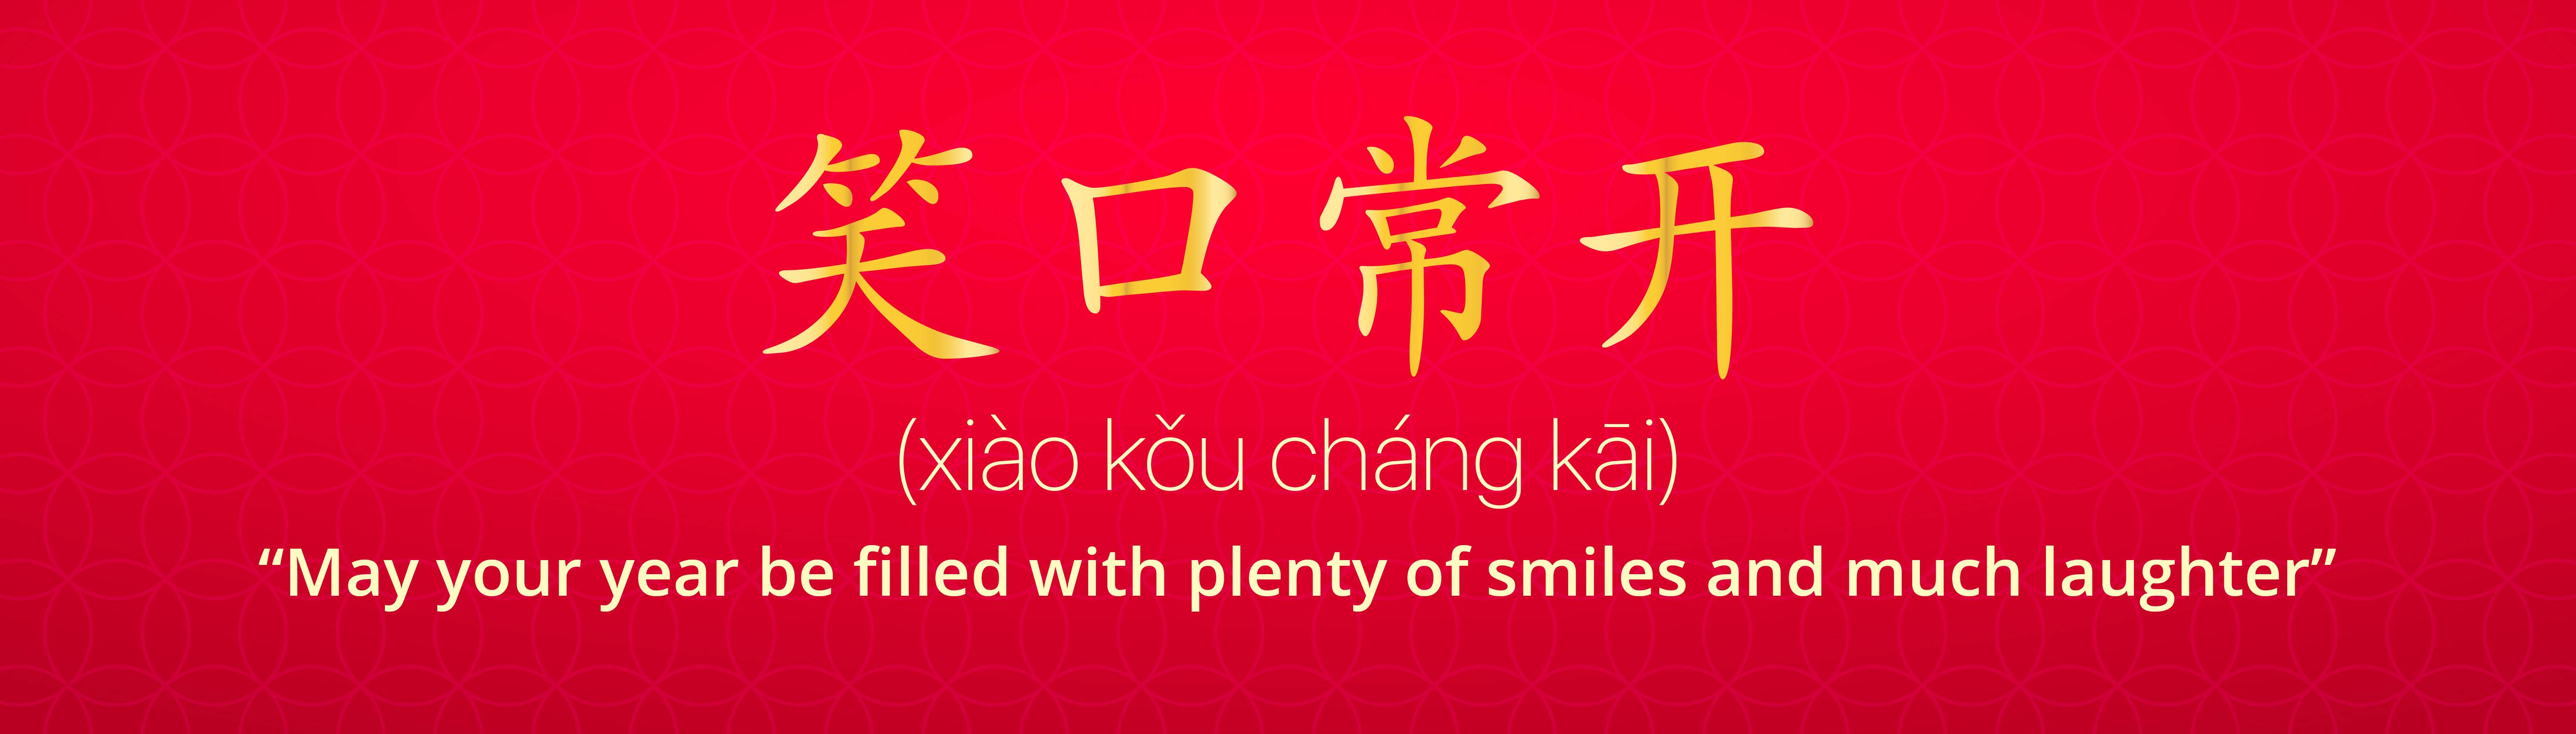 Xiao Kou Chang Kai (笑口常开: “May your year be filled with plenty of smiles and much laughter”